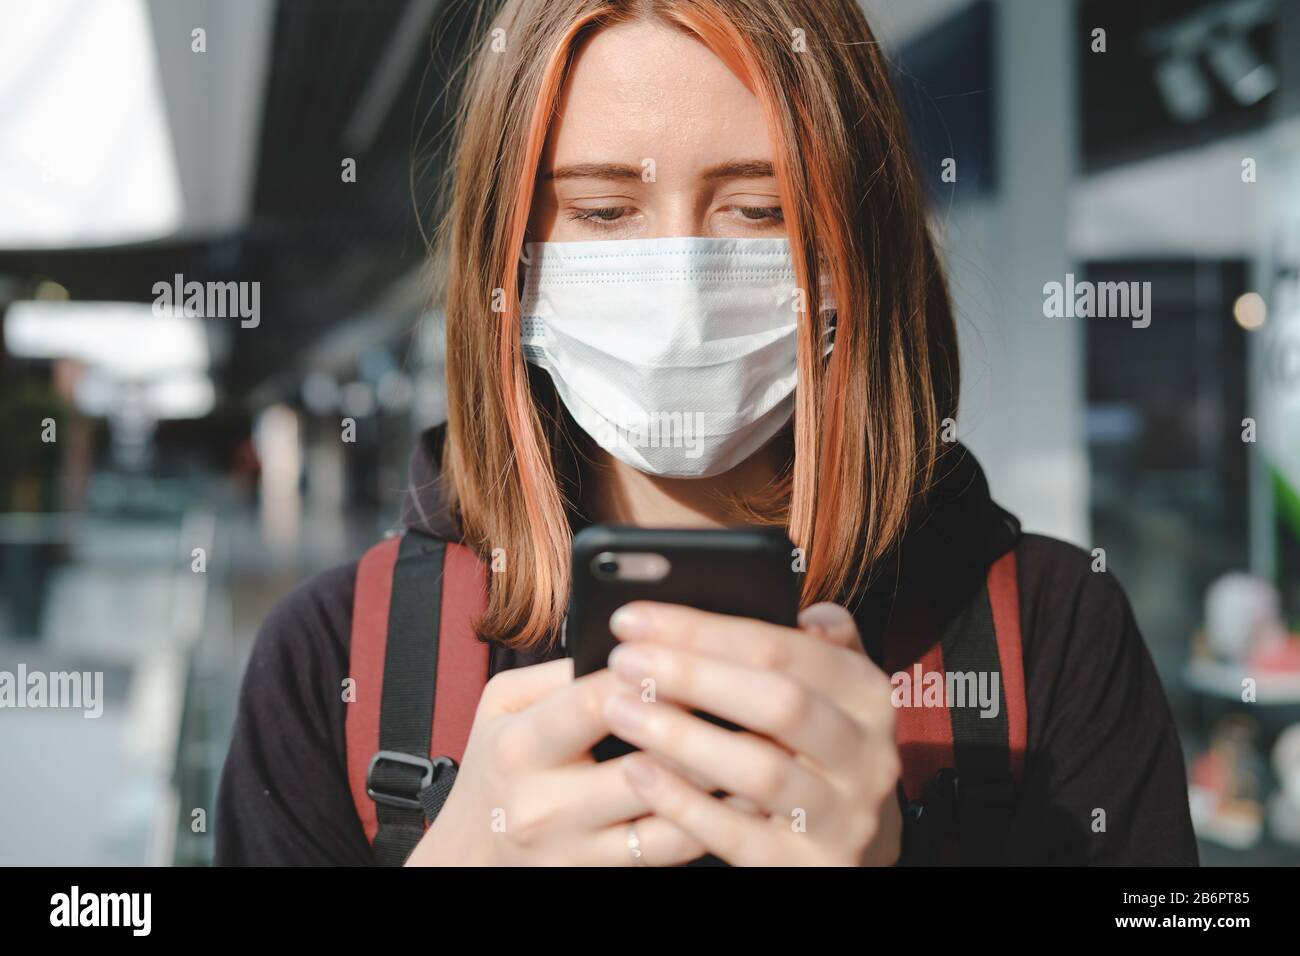 Woman in protective face mask using the phone at a public place. Coronavirus, COVID-19 spread prevention concept, responsible social behaviour of a ci Stock Photo